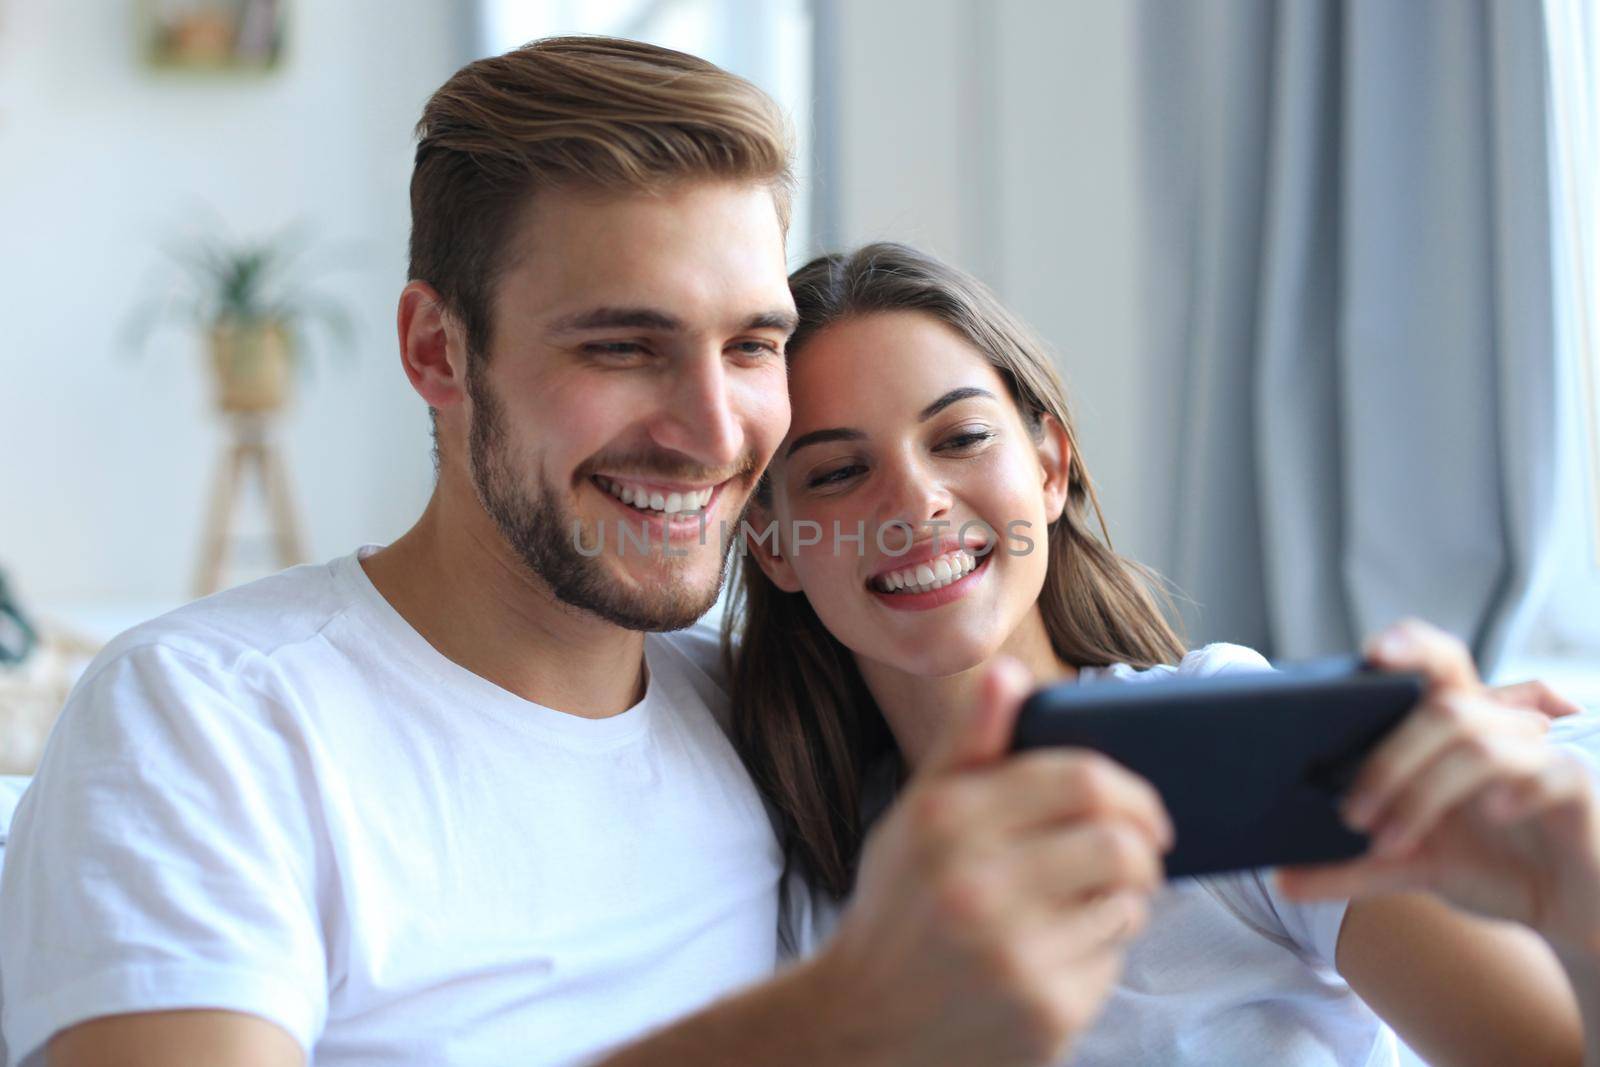 Young couple watching online content in a smart phone sitting on a sofa at home in the living room.